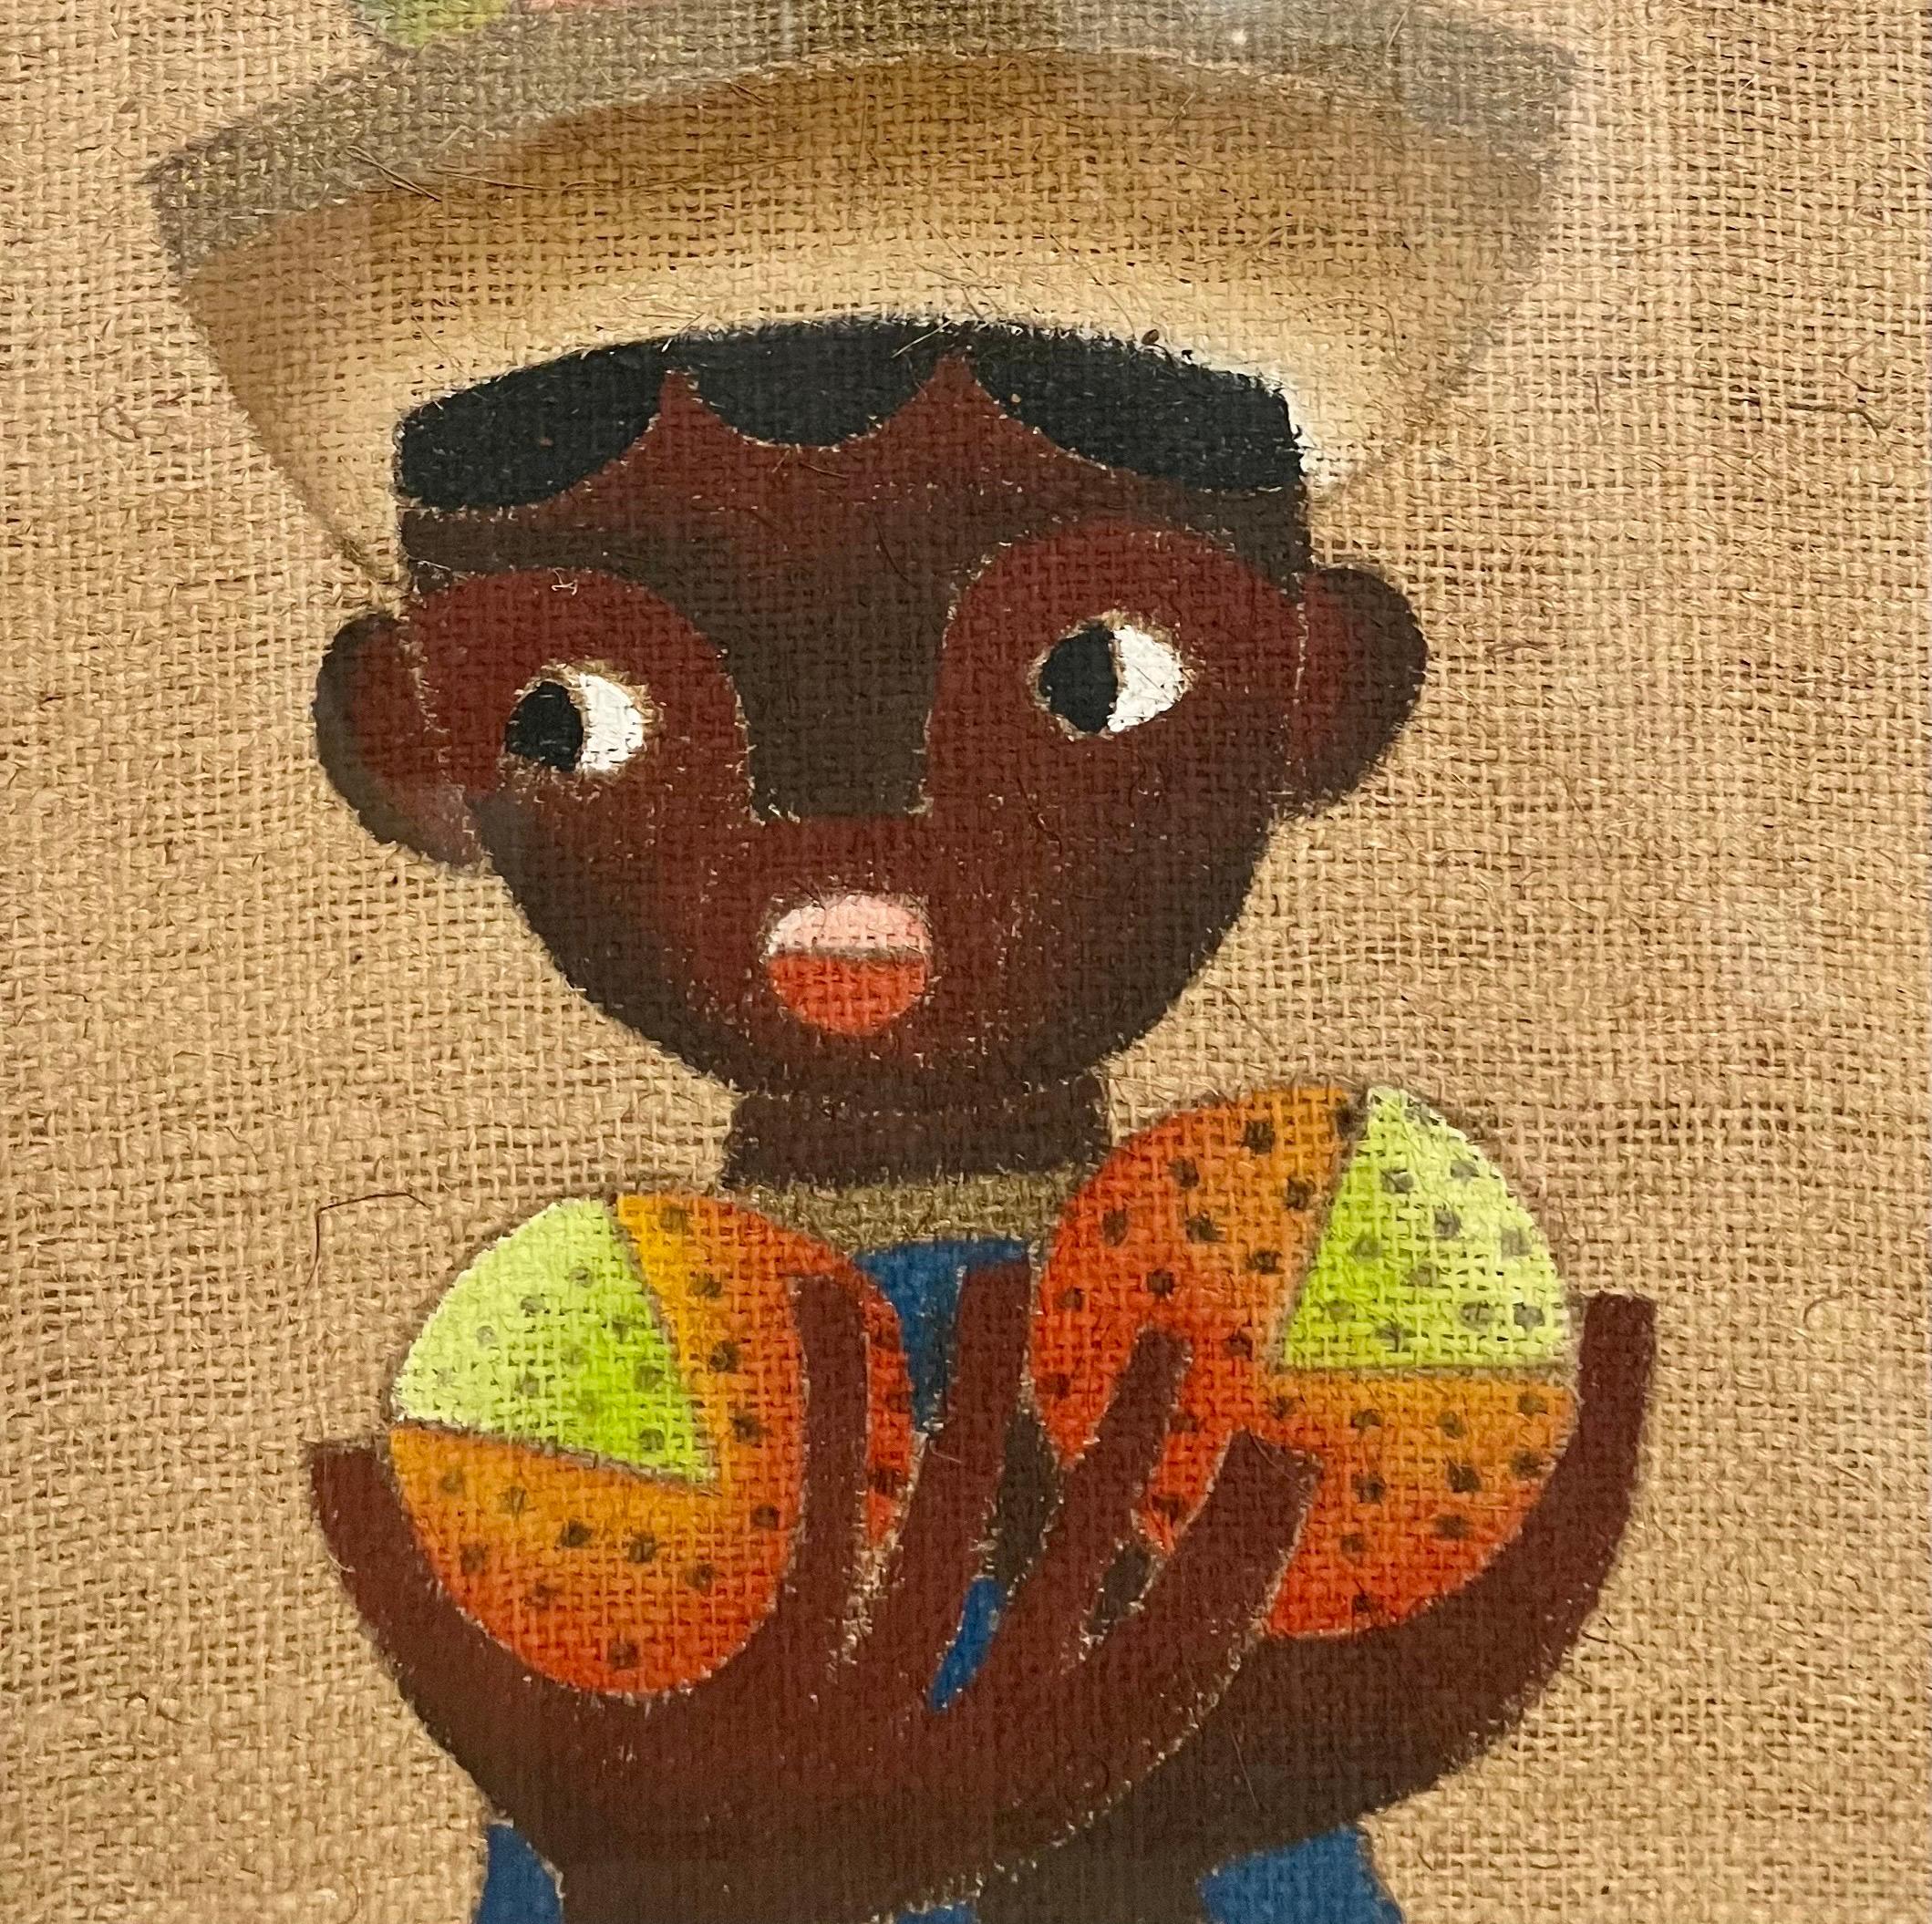 Folk Art Mexican Boy Oil Painting on Burlap Charming Naive African American Art